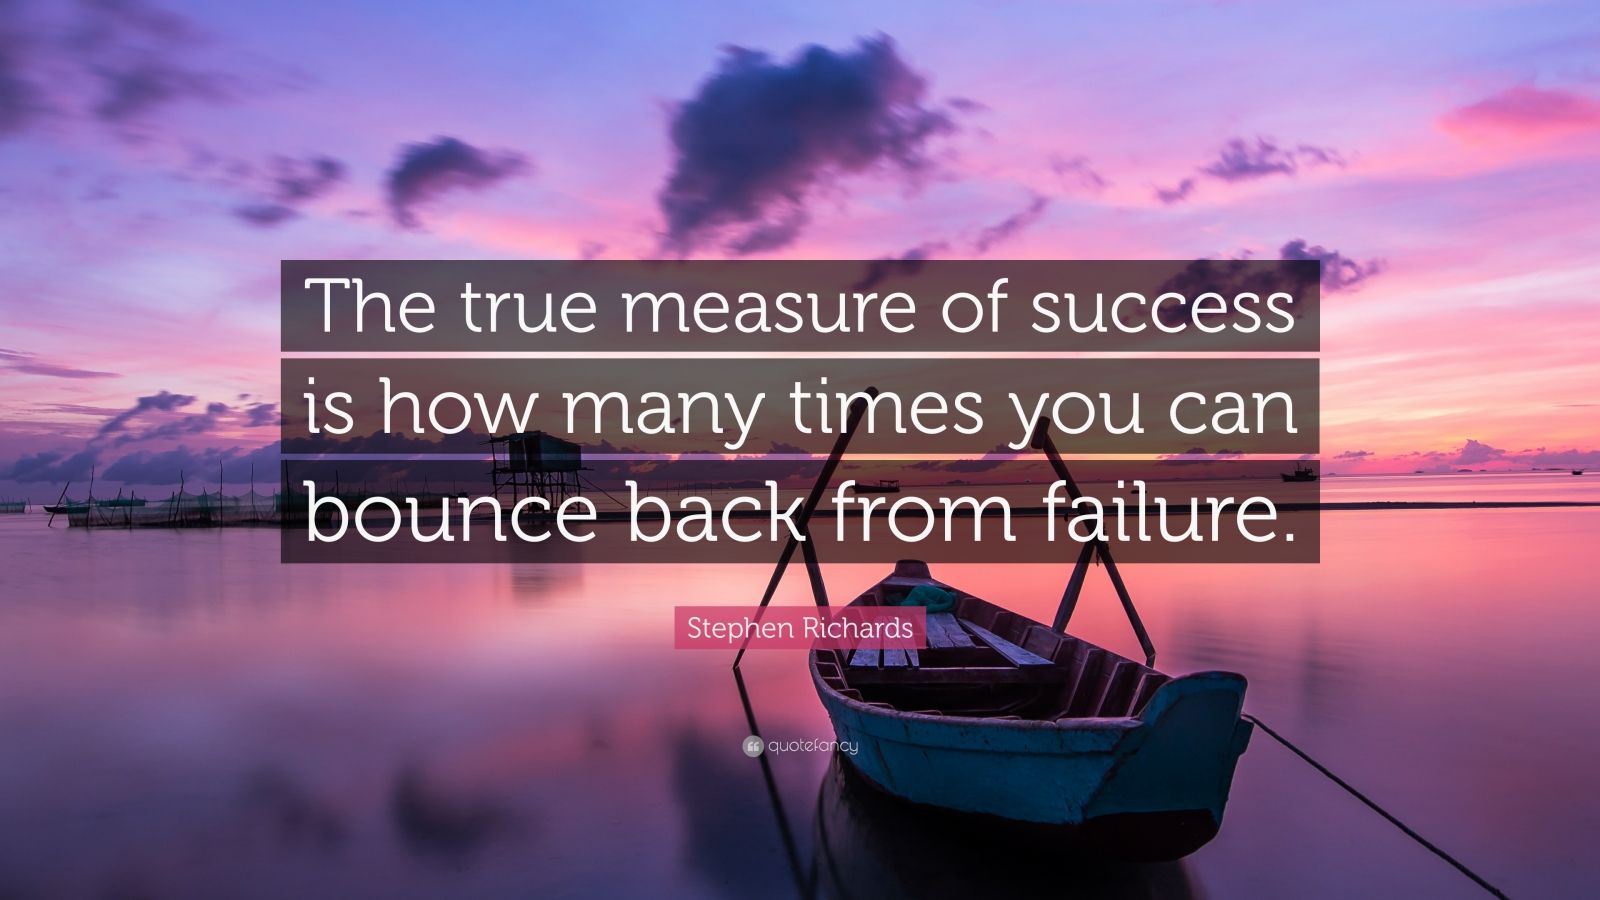 Stephen Richards Quote “The true measure of success is